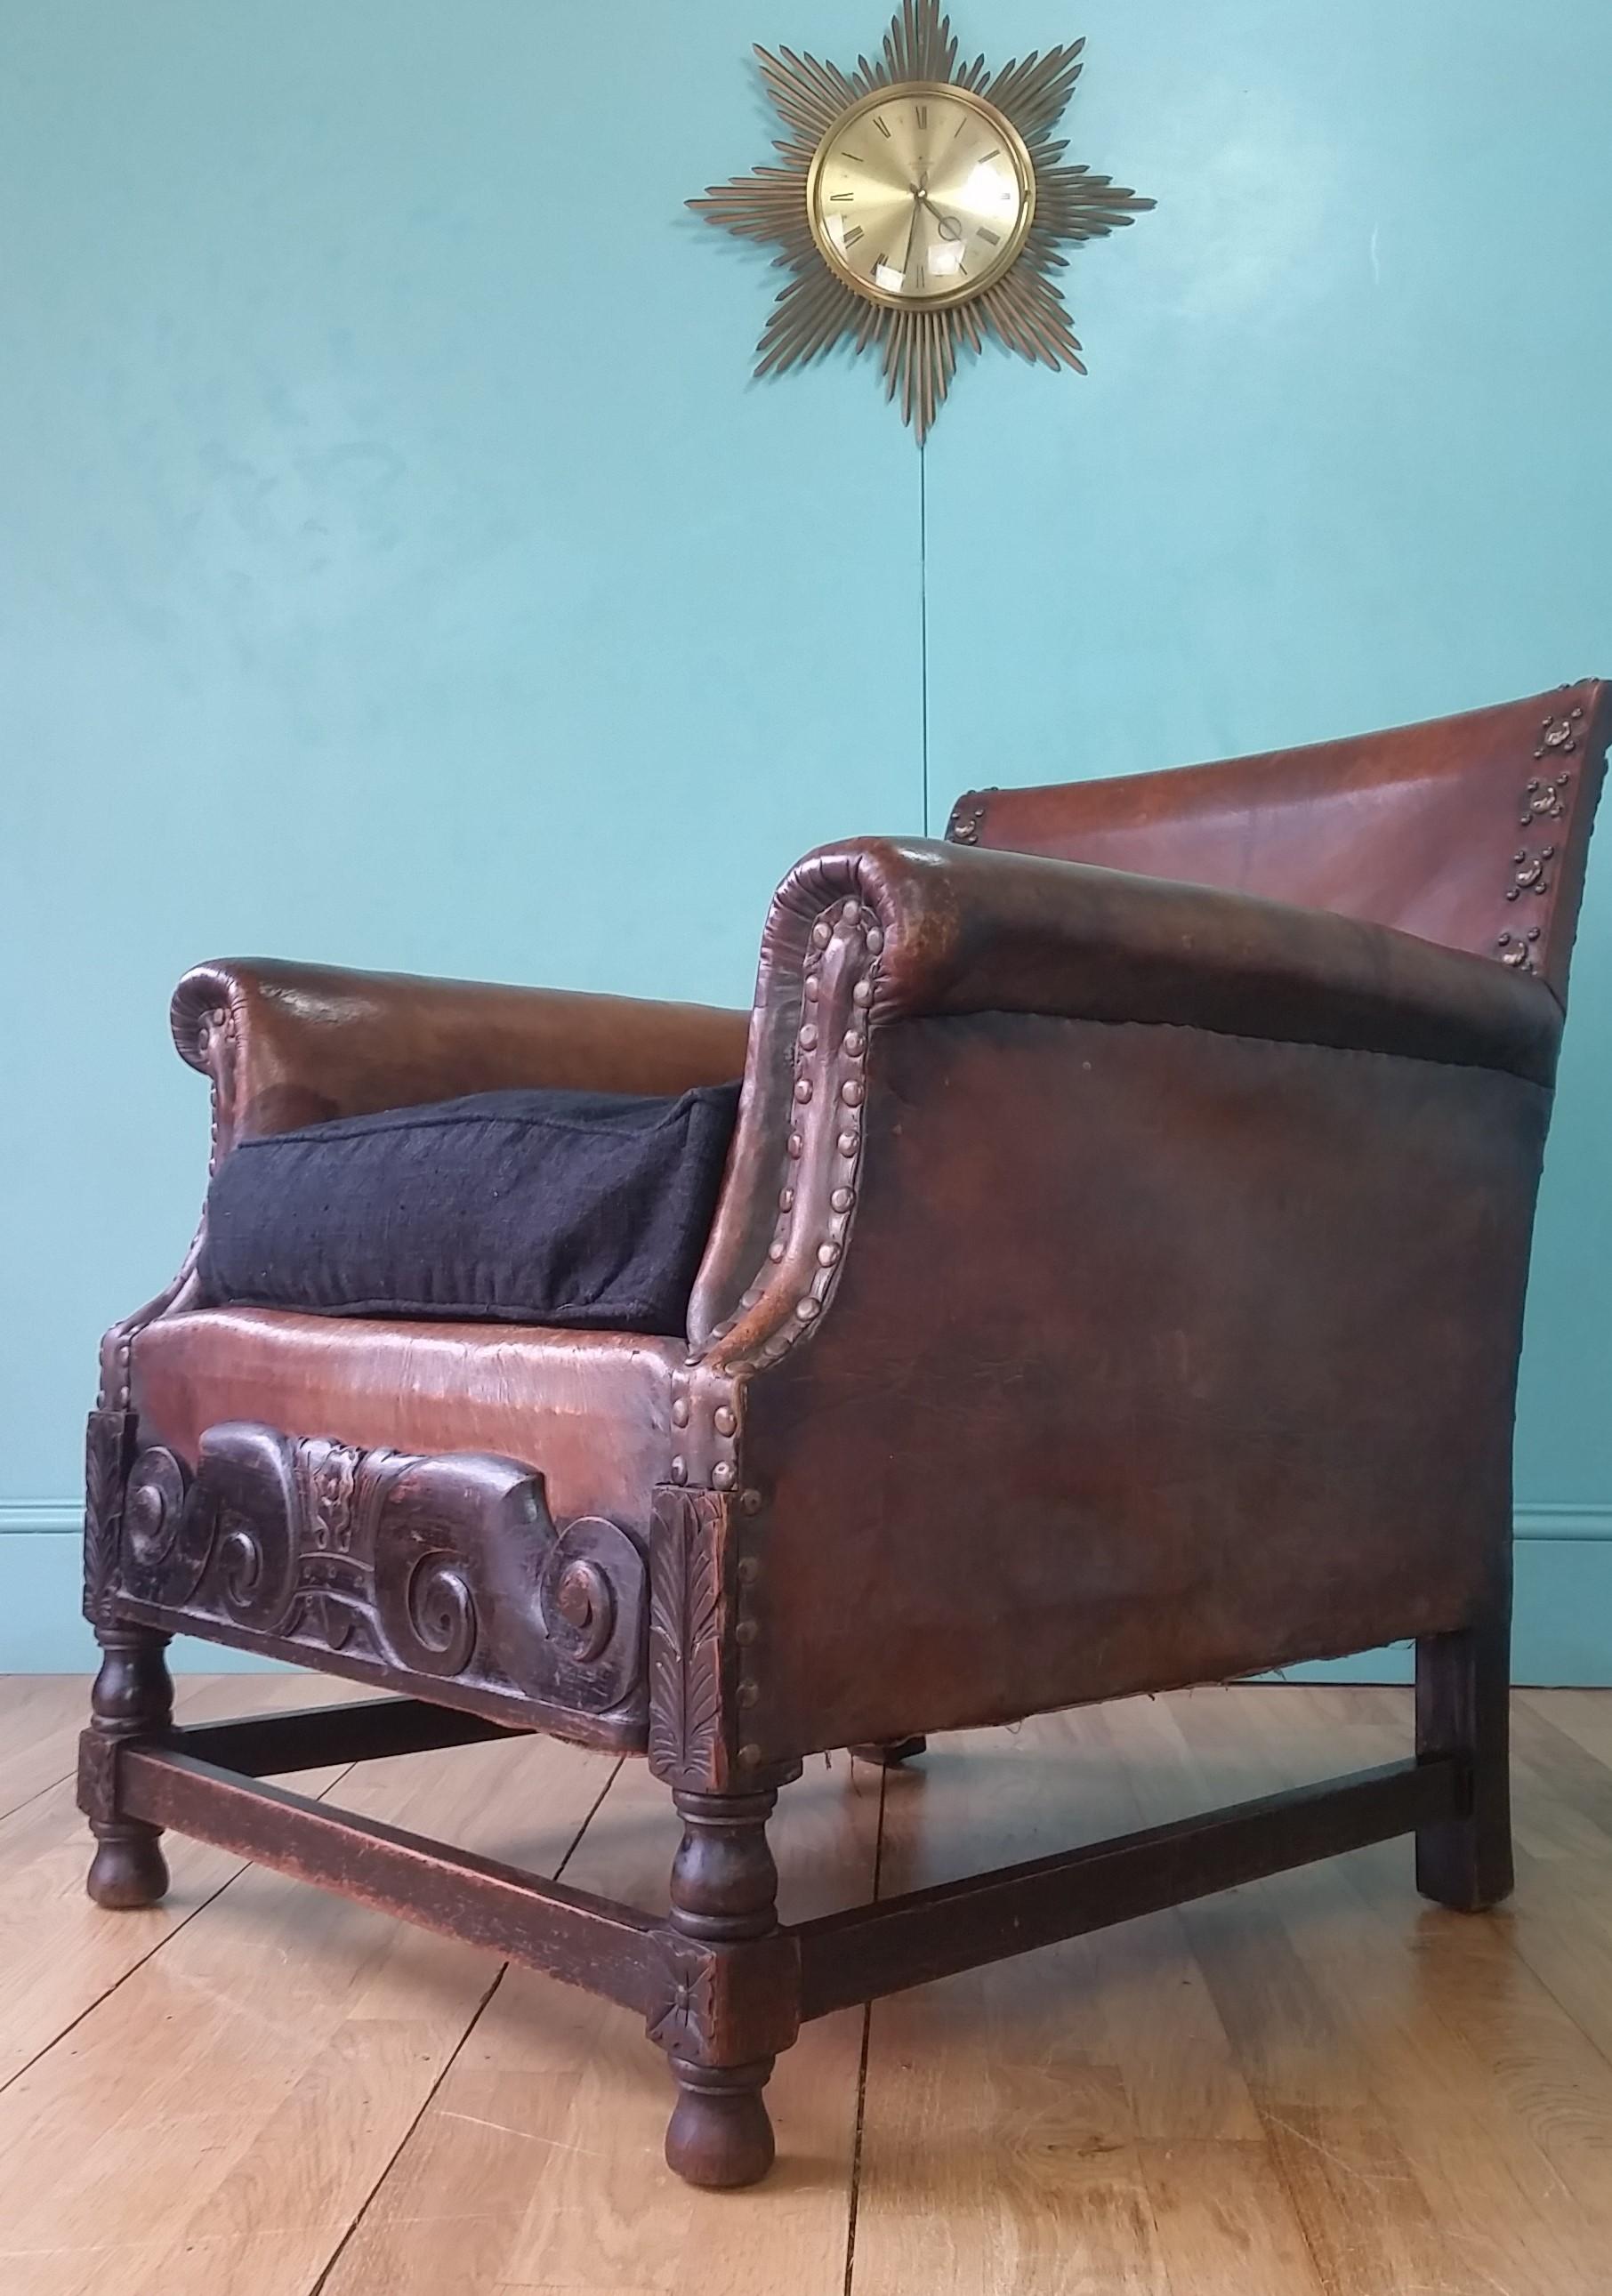 English antique leather armchair circa 1880 - 1900
Designed in the style of the arts & crafts movement (1860 - 1920) with ebonised oak frame, decorative front panel and original brass studs.
In full working order with a firm frame and no damage to